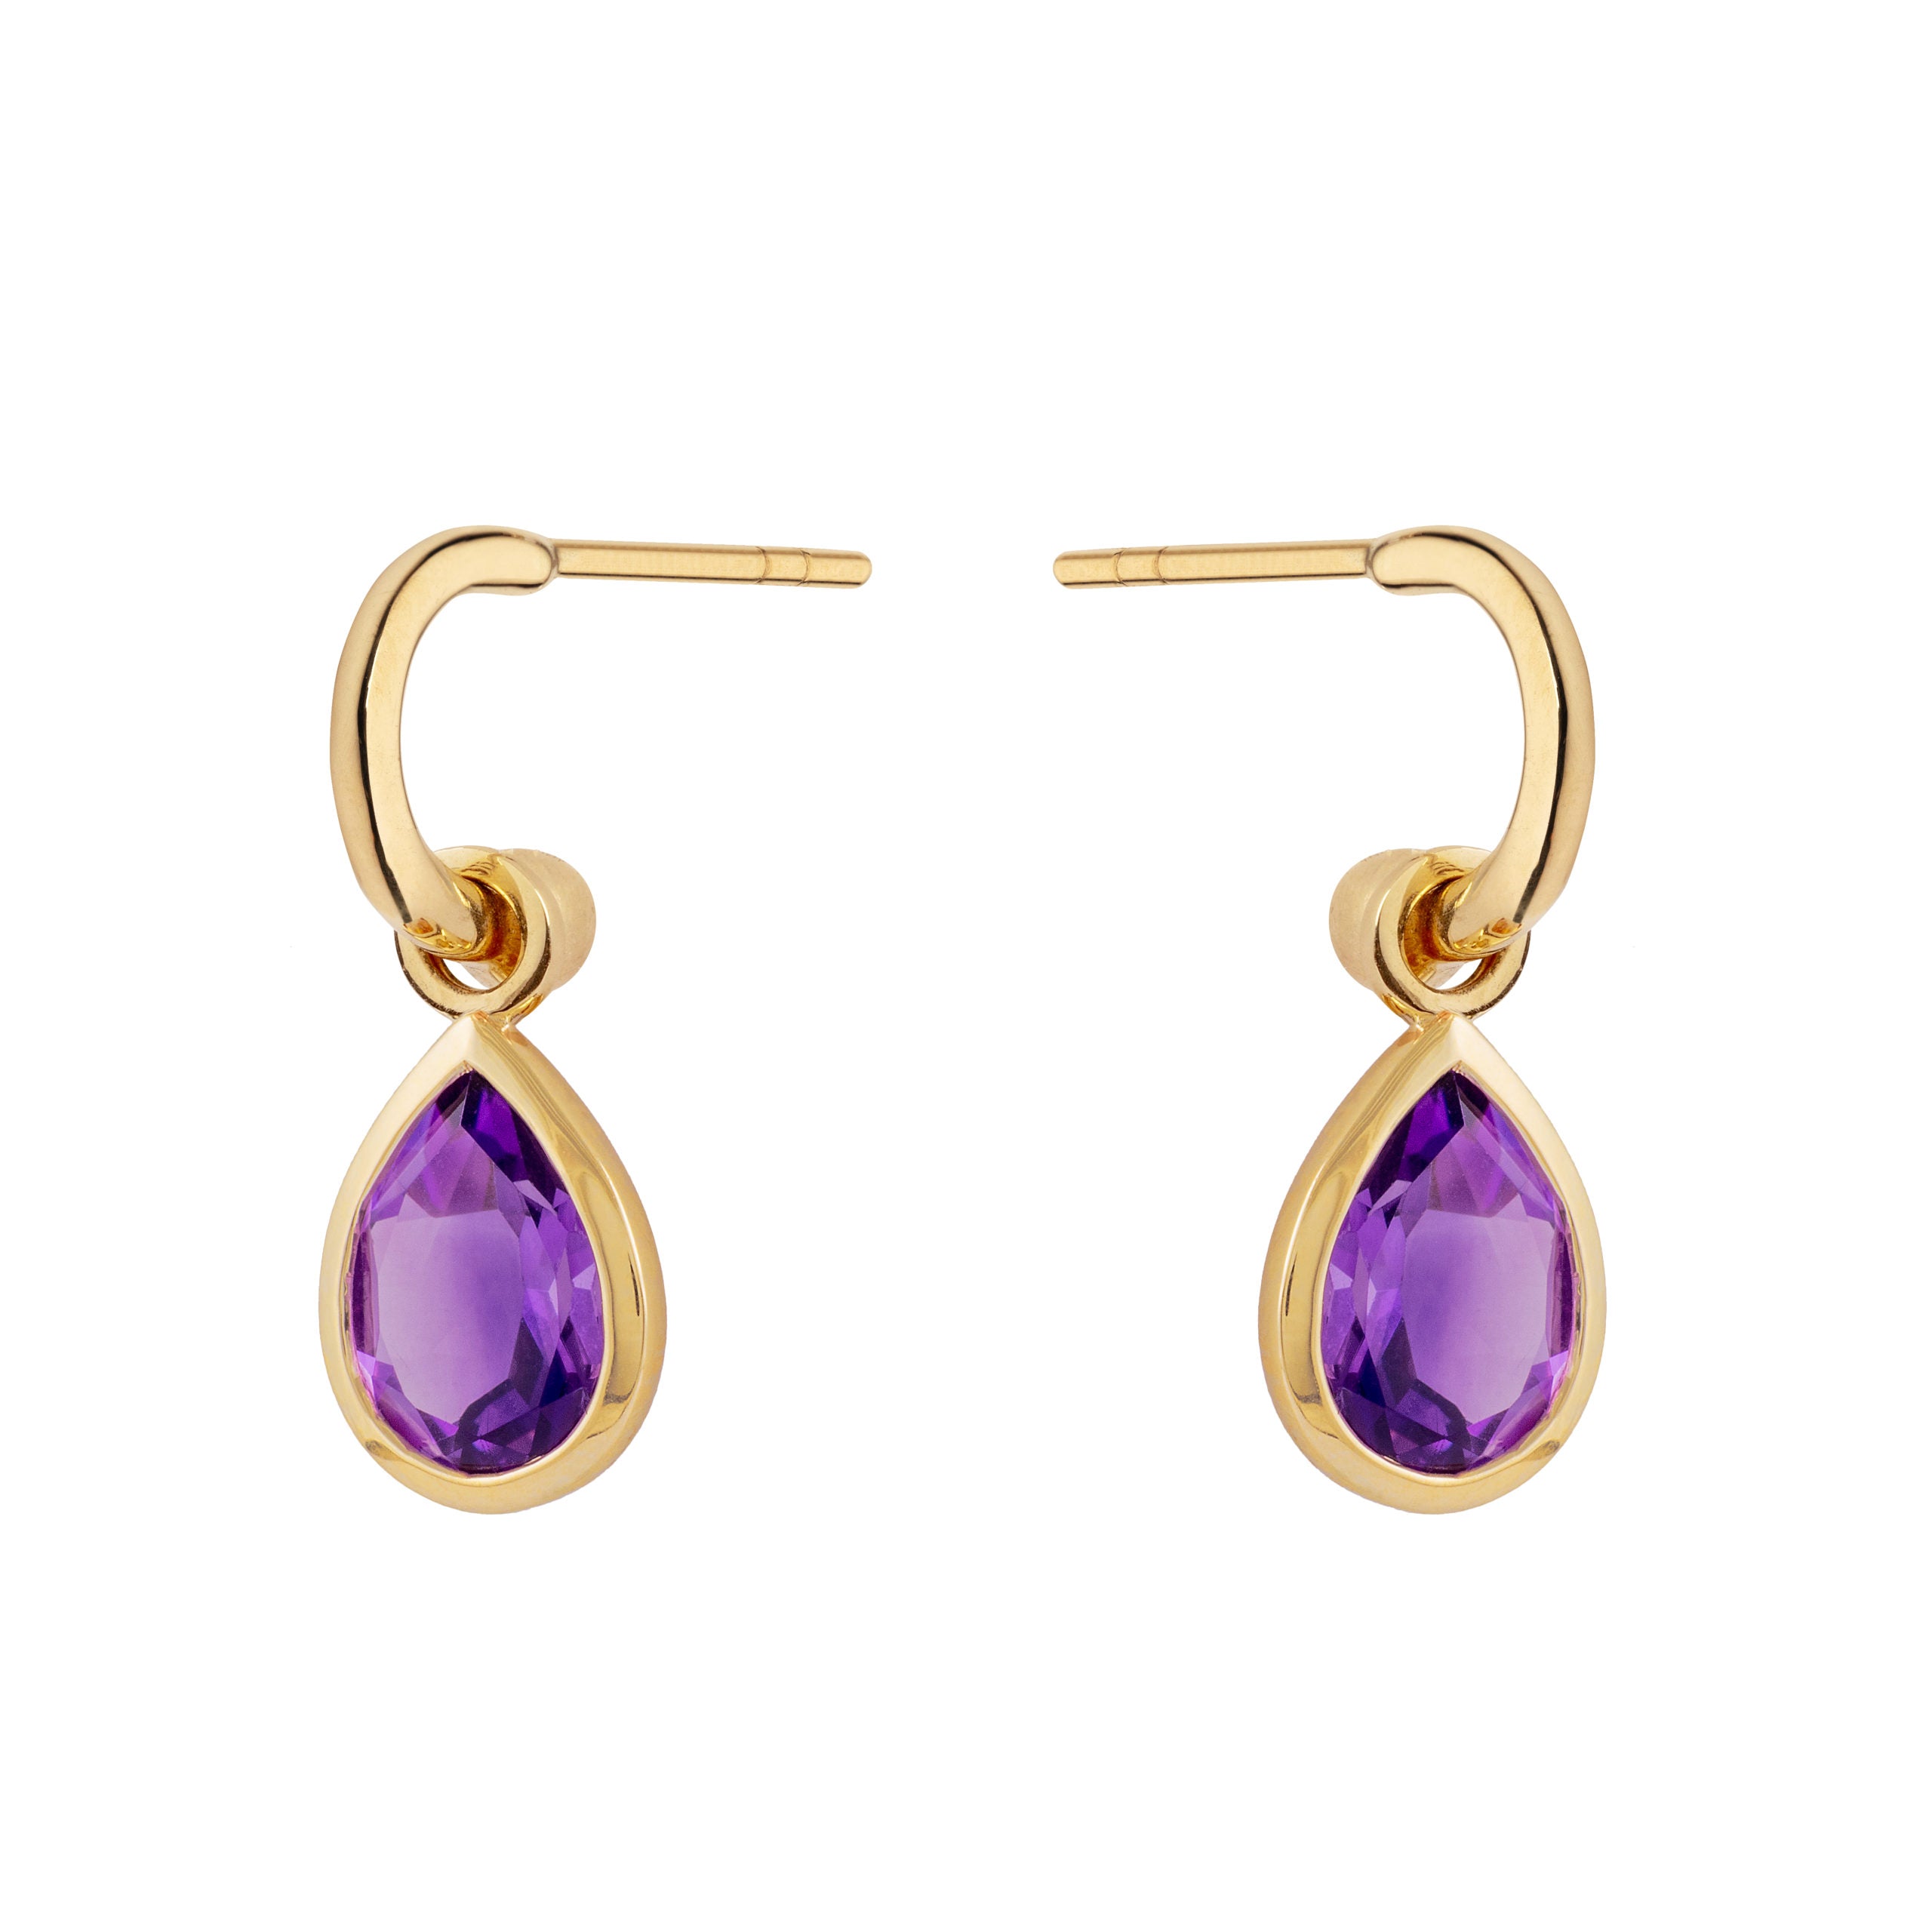 9ct Yellow Gold Hoop Earrings with Detachable Amethyst Pear Drops